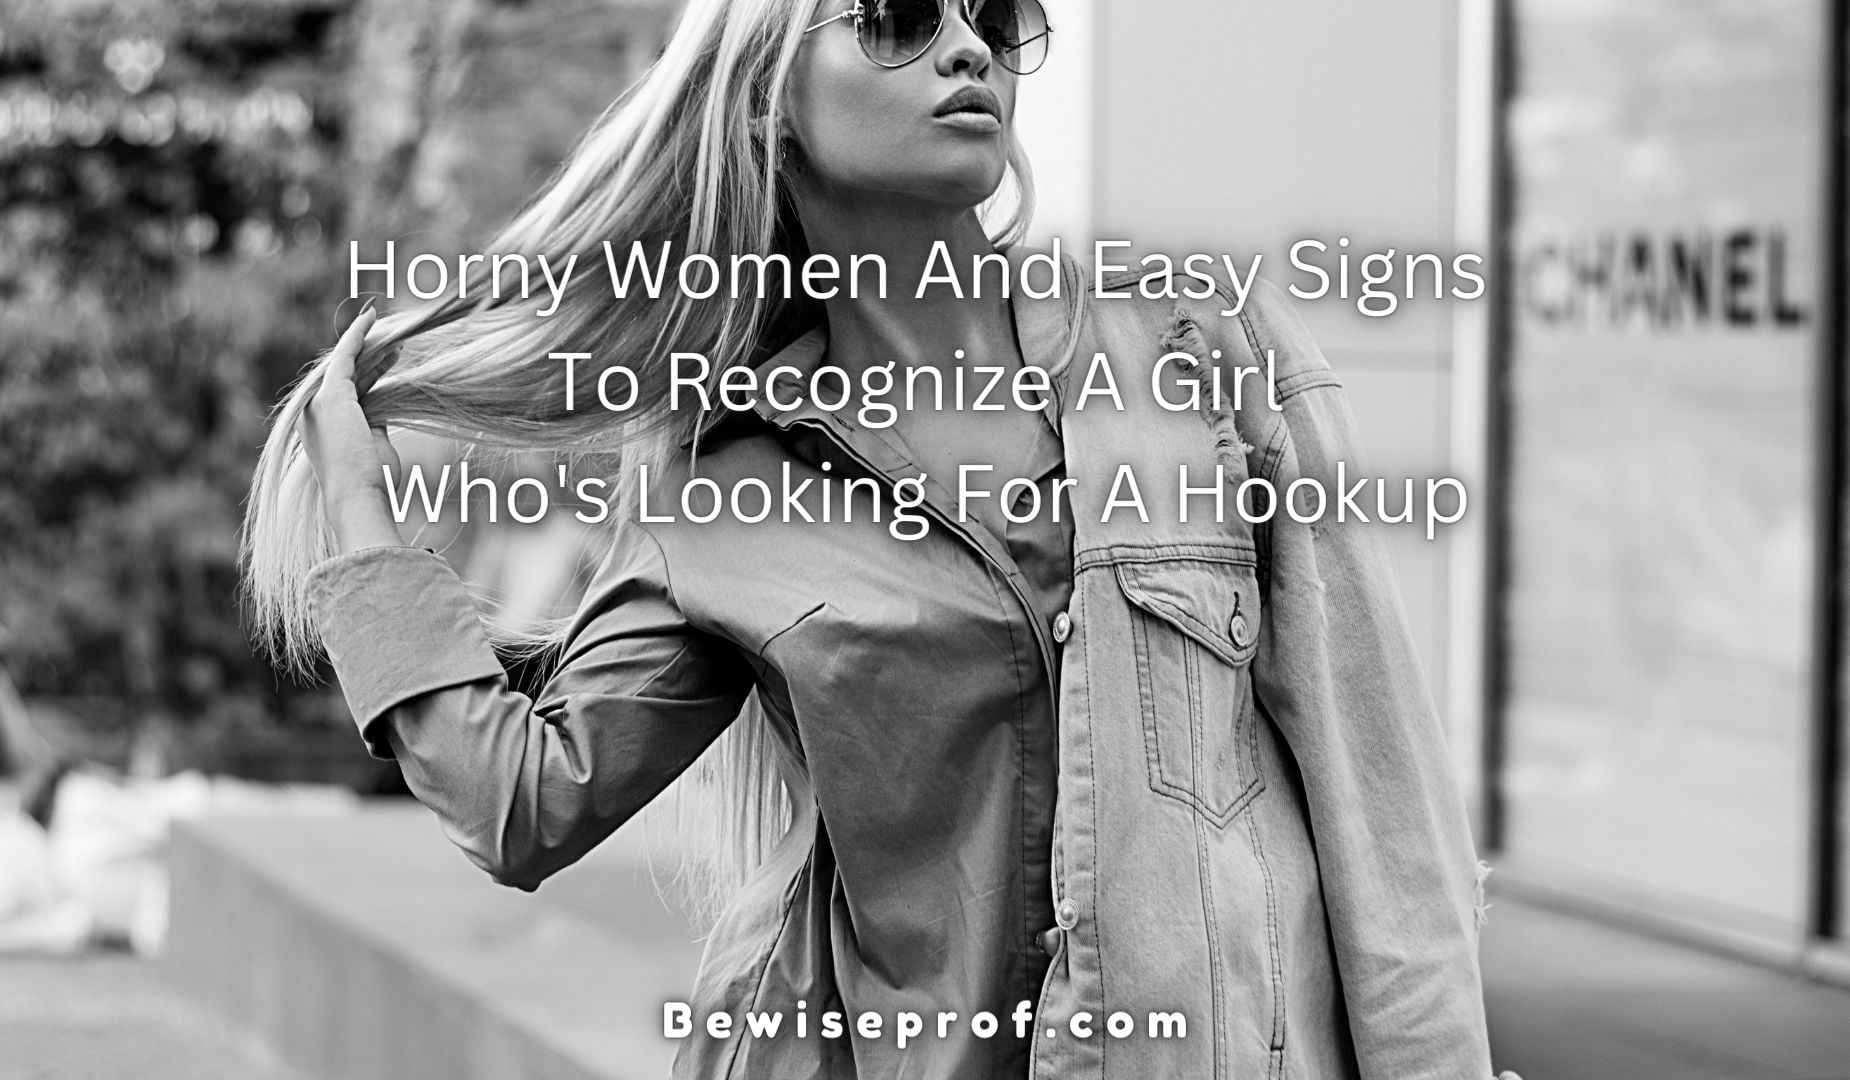 Horny Women And Easy Signs To Recognize A Girl Who's Looking For A Hookup